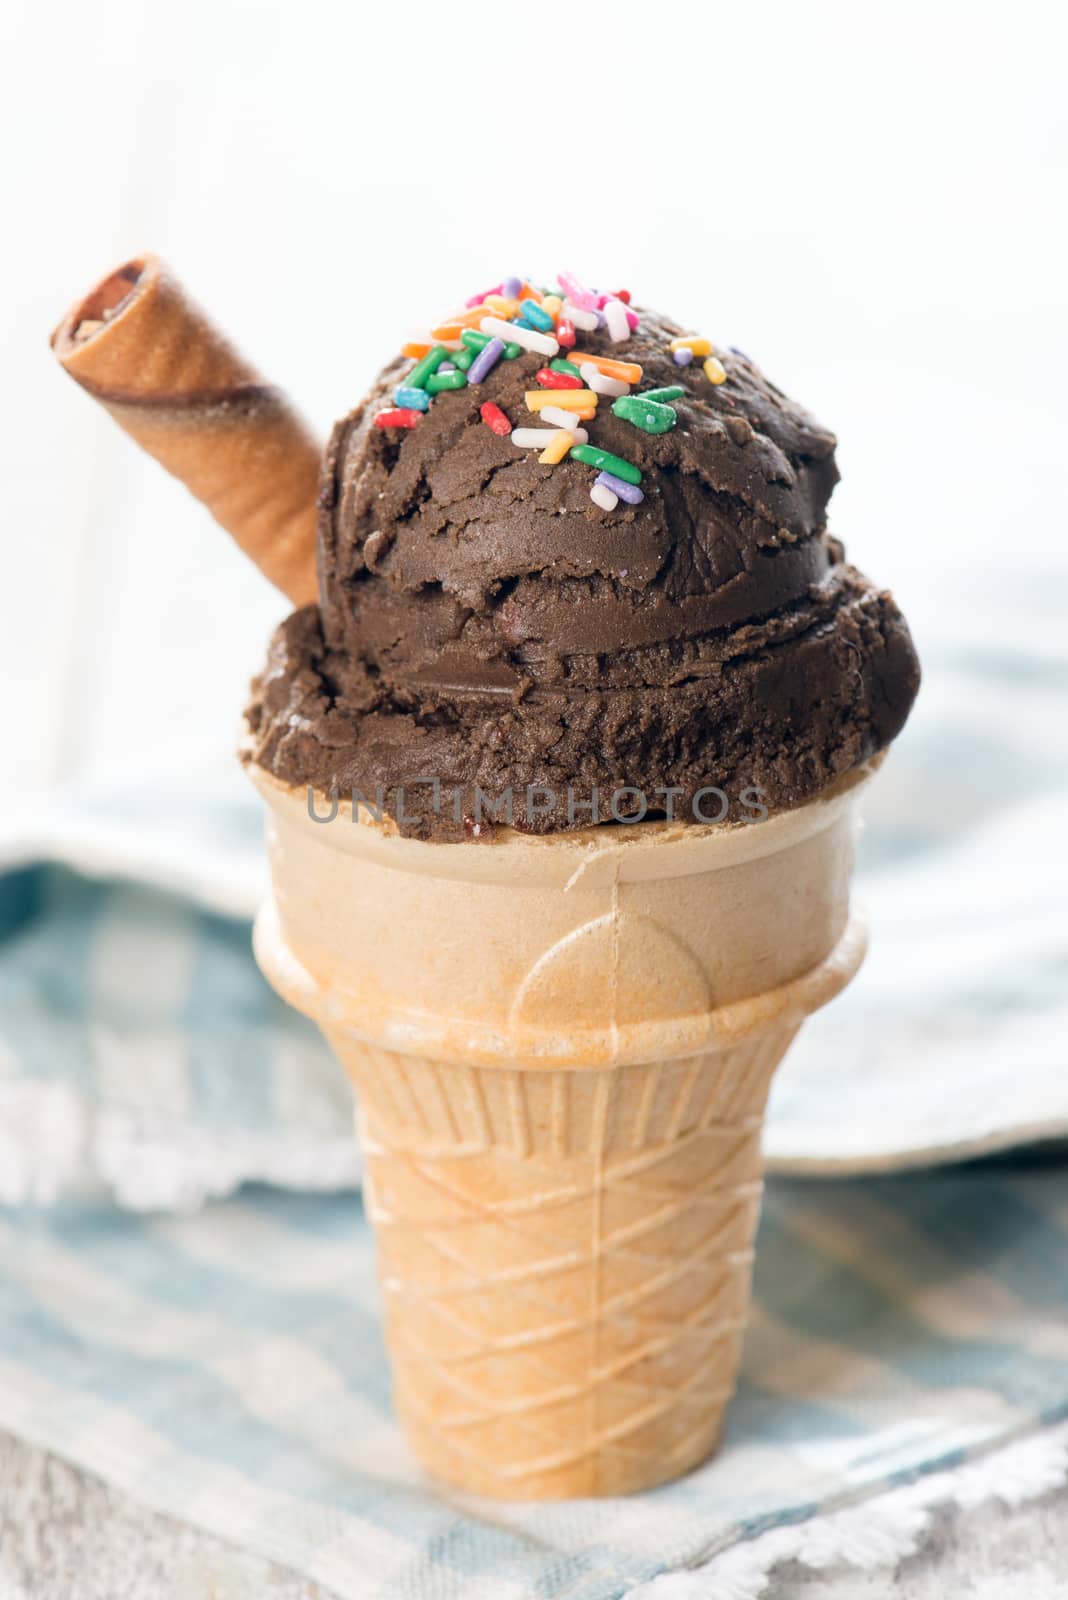 Chocolate ice cream in waffle cone on bright wooden background.